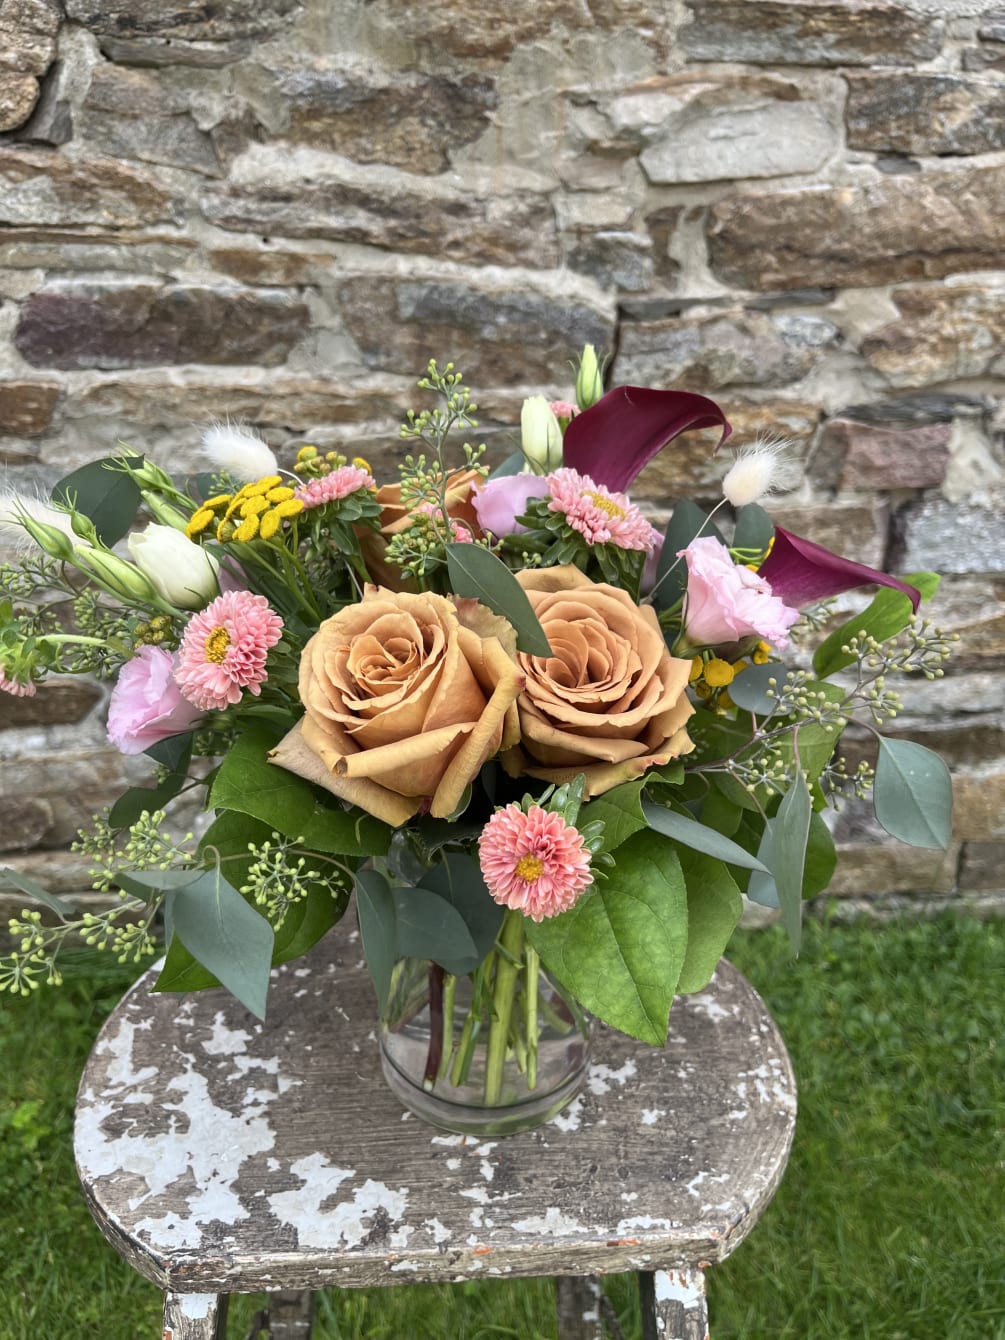 A dreamy collection of warm toffee-colored roses and plum calla lilies, accented